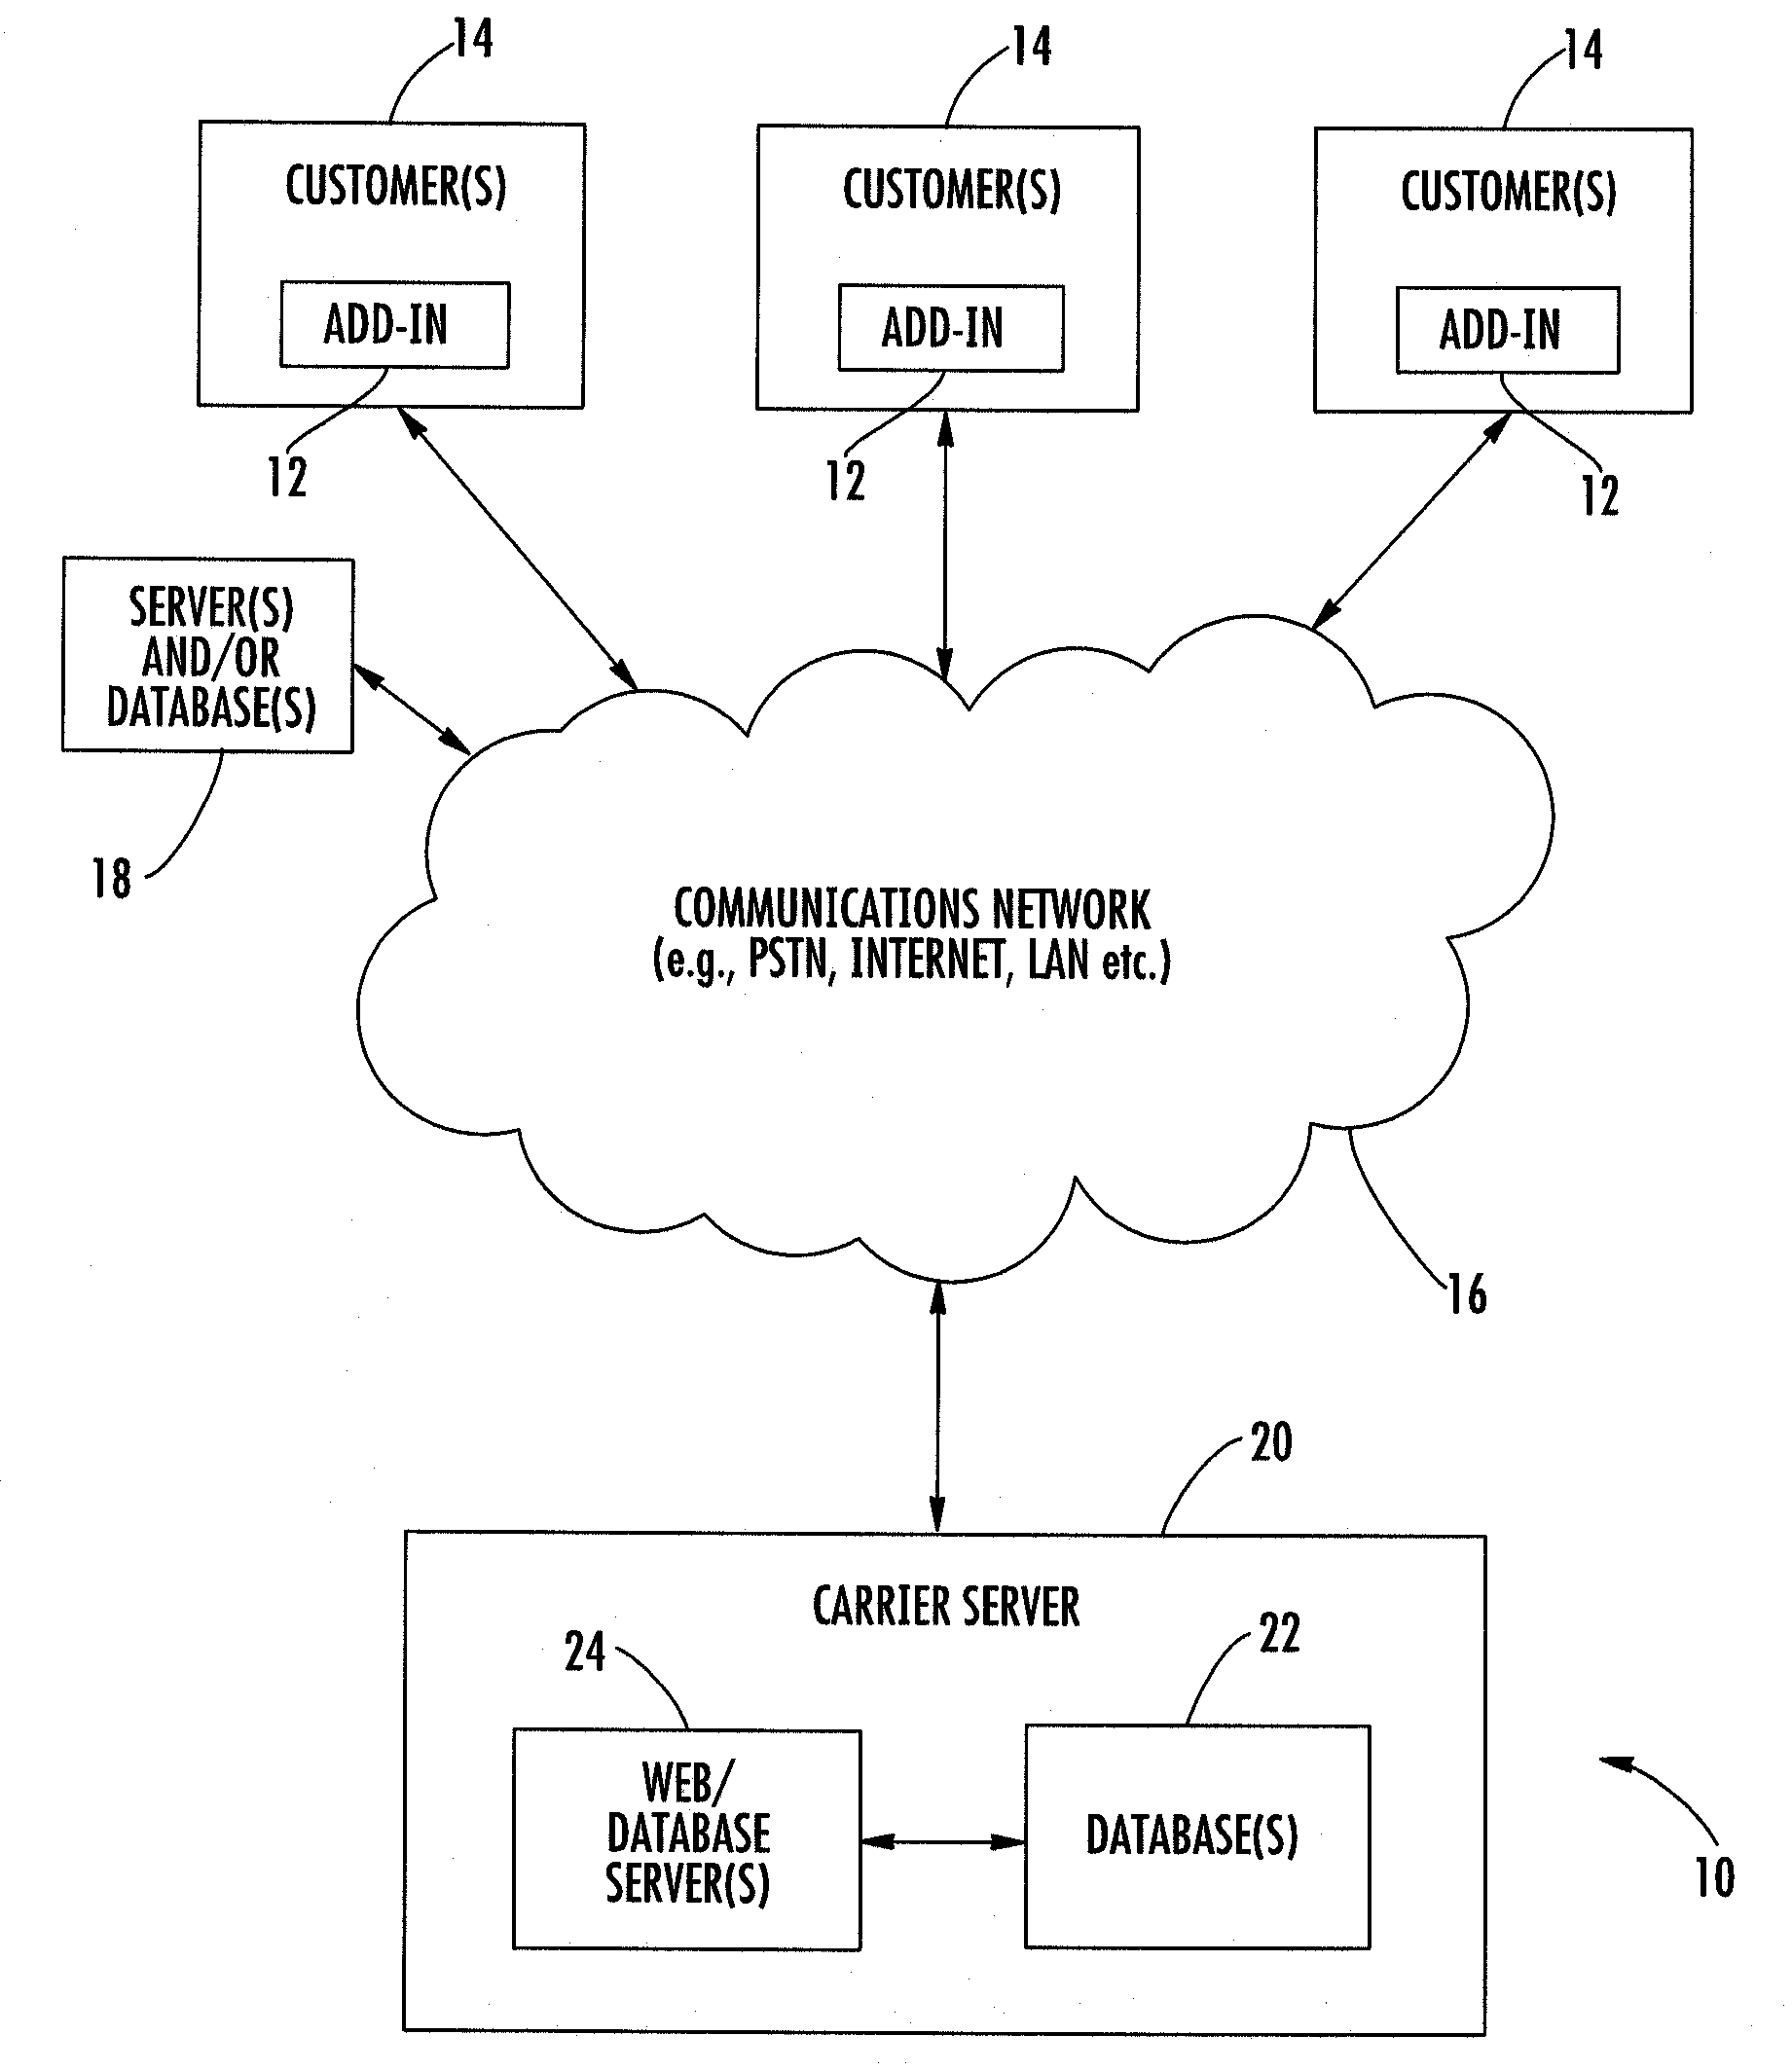 Method and System for Add-in Module for Obtaining Shipping Information